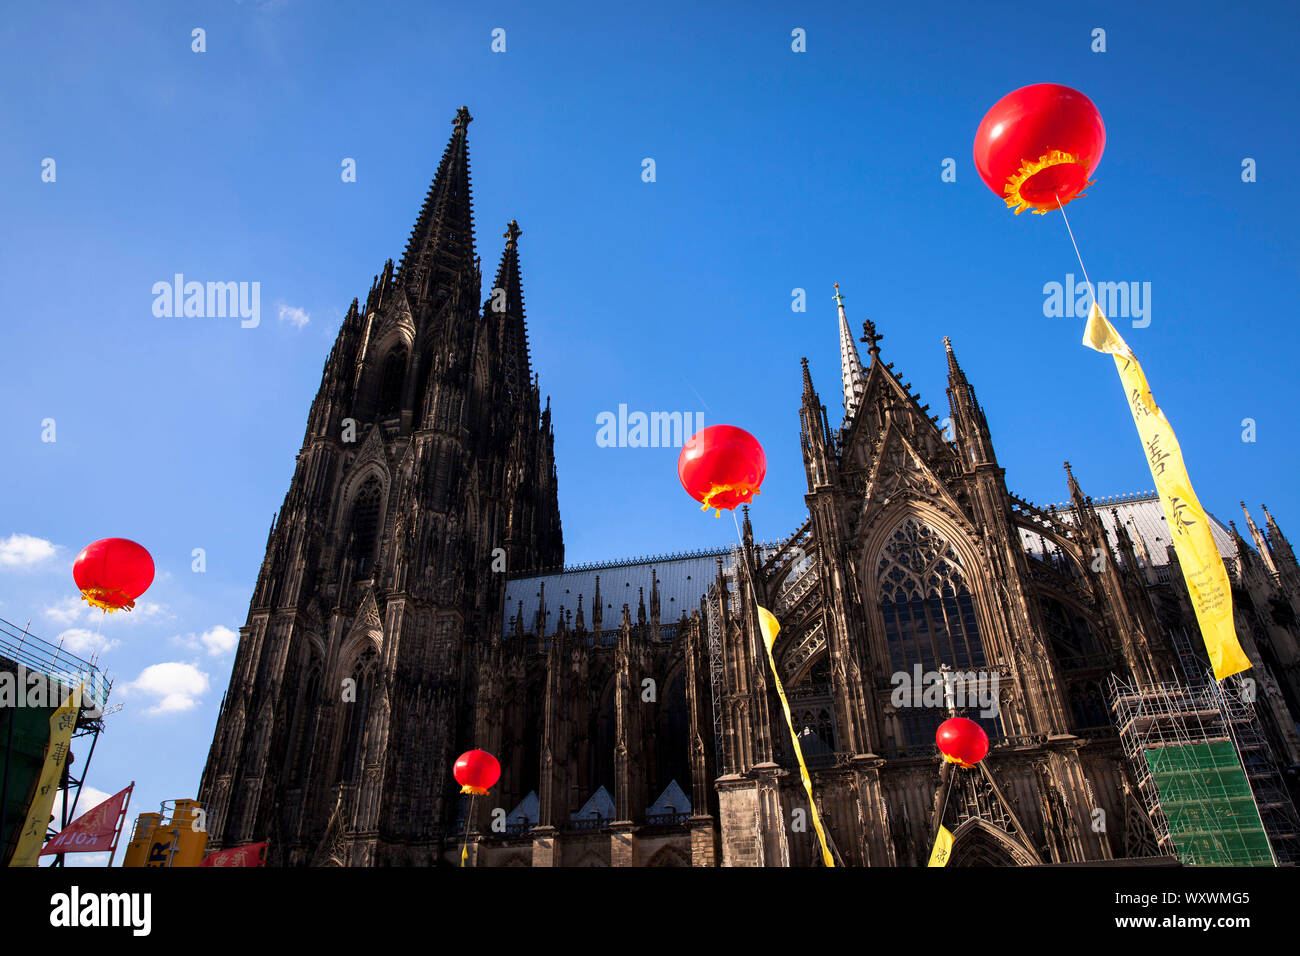 China festival on Roncalli square at the cathedral, balloons as decoration, Cologne, Germany.  Chinafest auf dem Roncalliplatz am Dom, Ballone als Dek Stock Photo